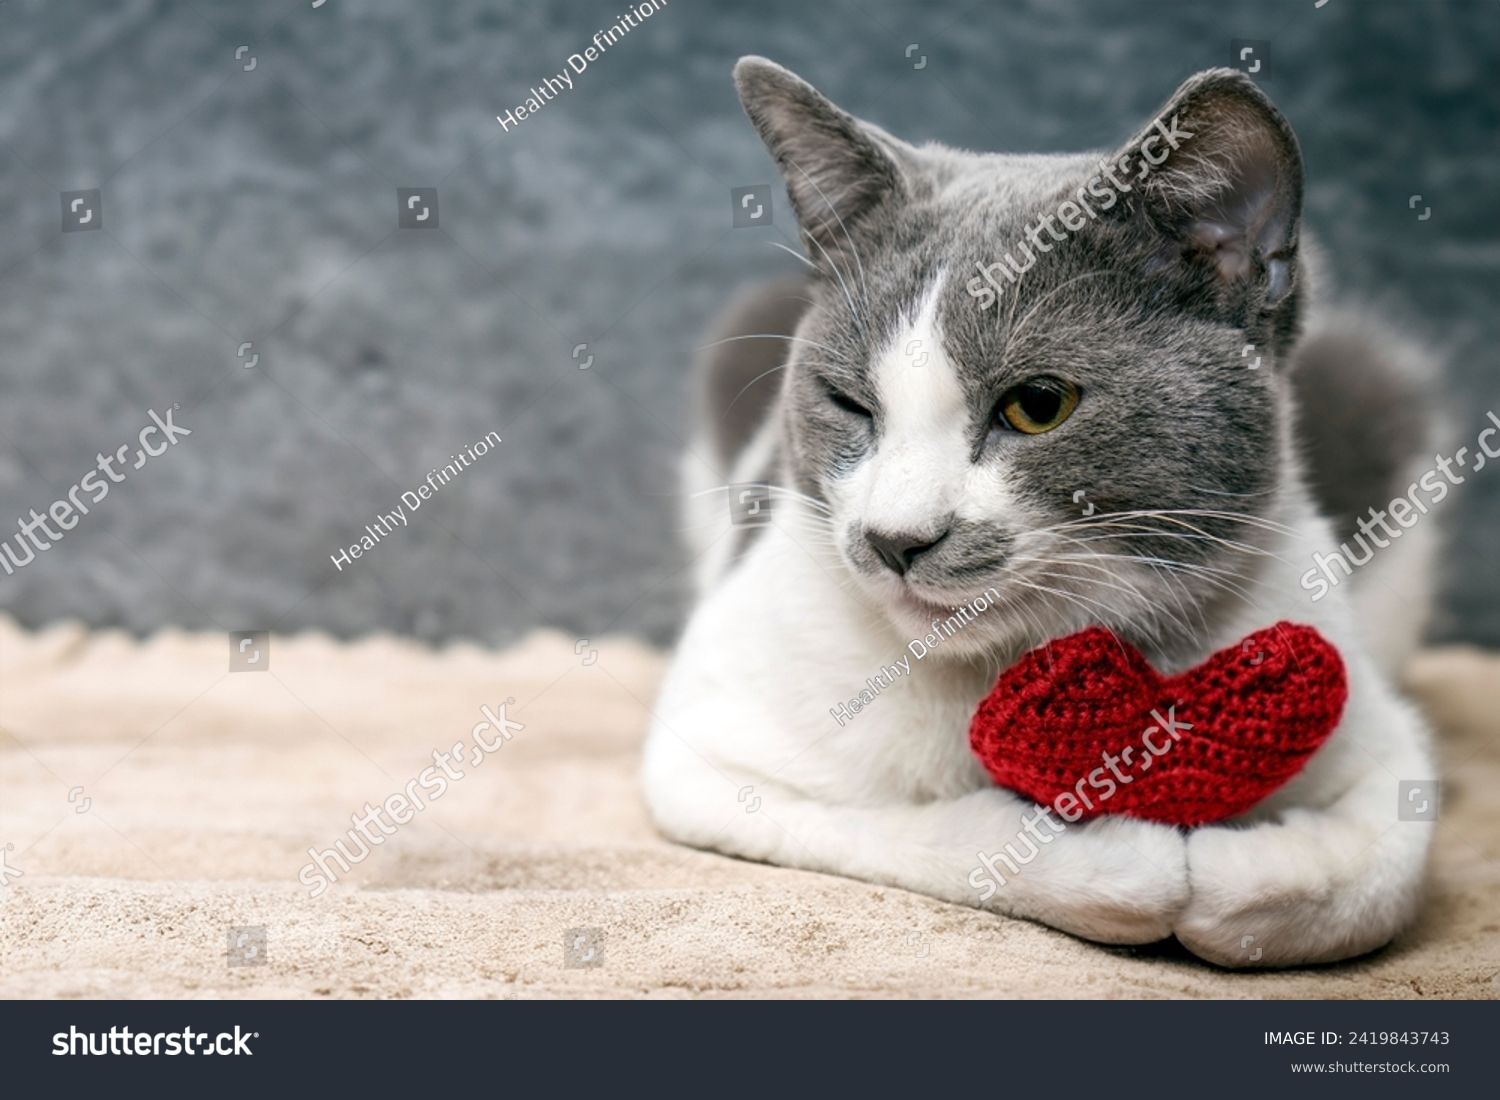 Red knitted heart in the paws of a cat. a gray and black fluffy cat for Valentine's Day or postcard. Textured background with a cat. copy space. valentine's day, lovers day, love concept #2419843743